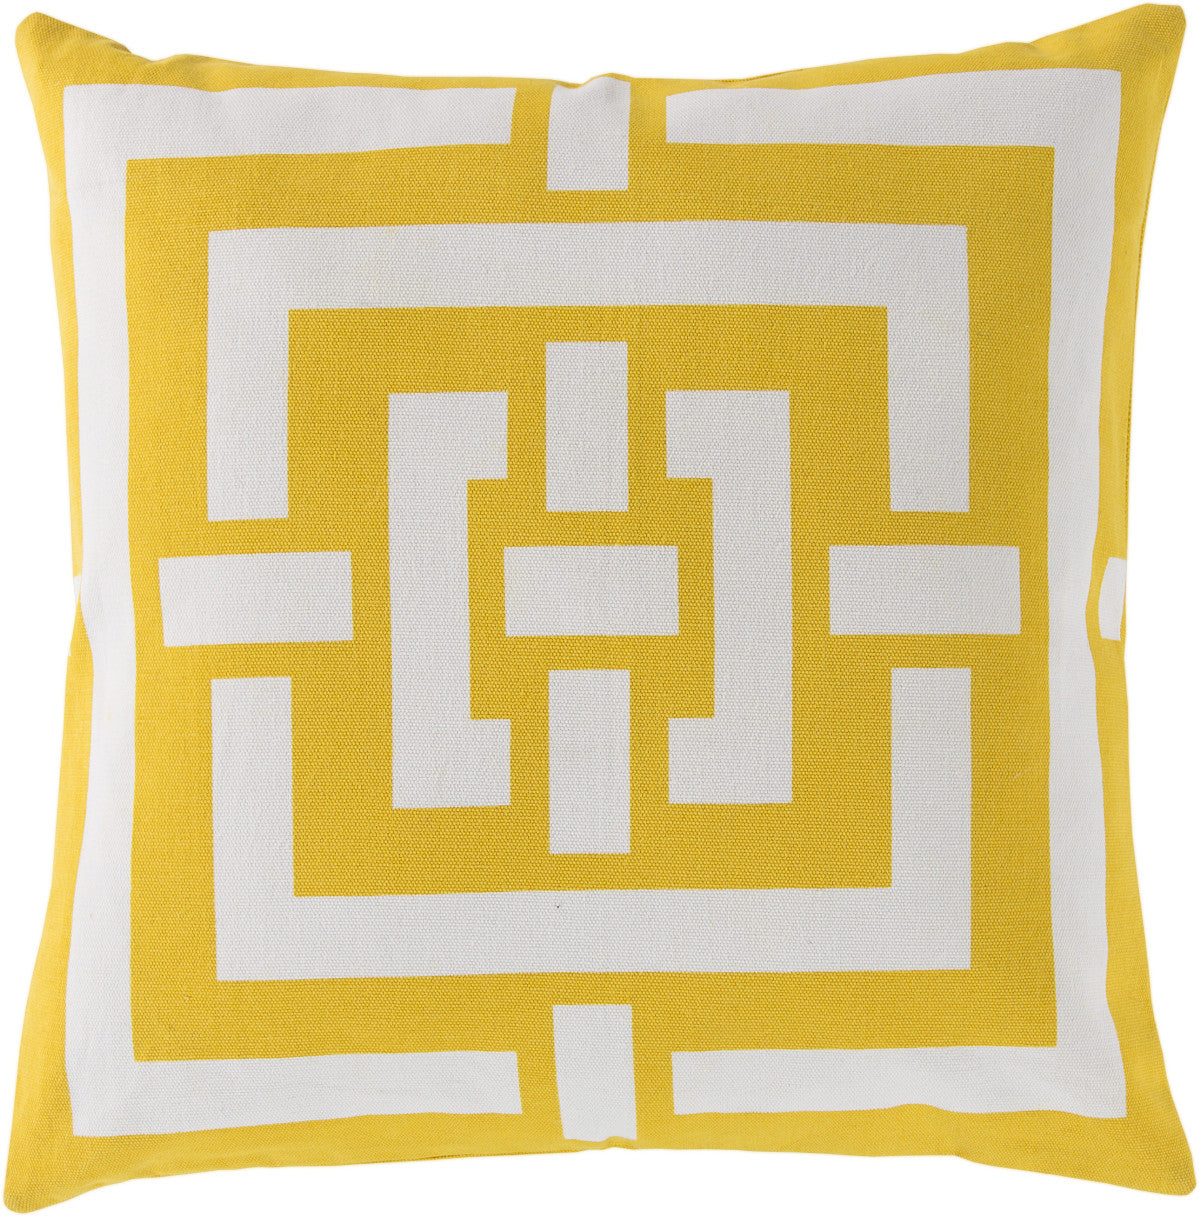 Surya Circles and Squares Charming Criss Cross FB-001 Pillow by Florence Broadhurst main image